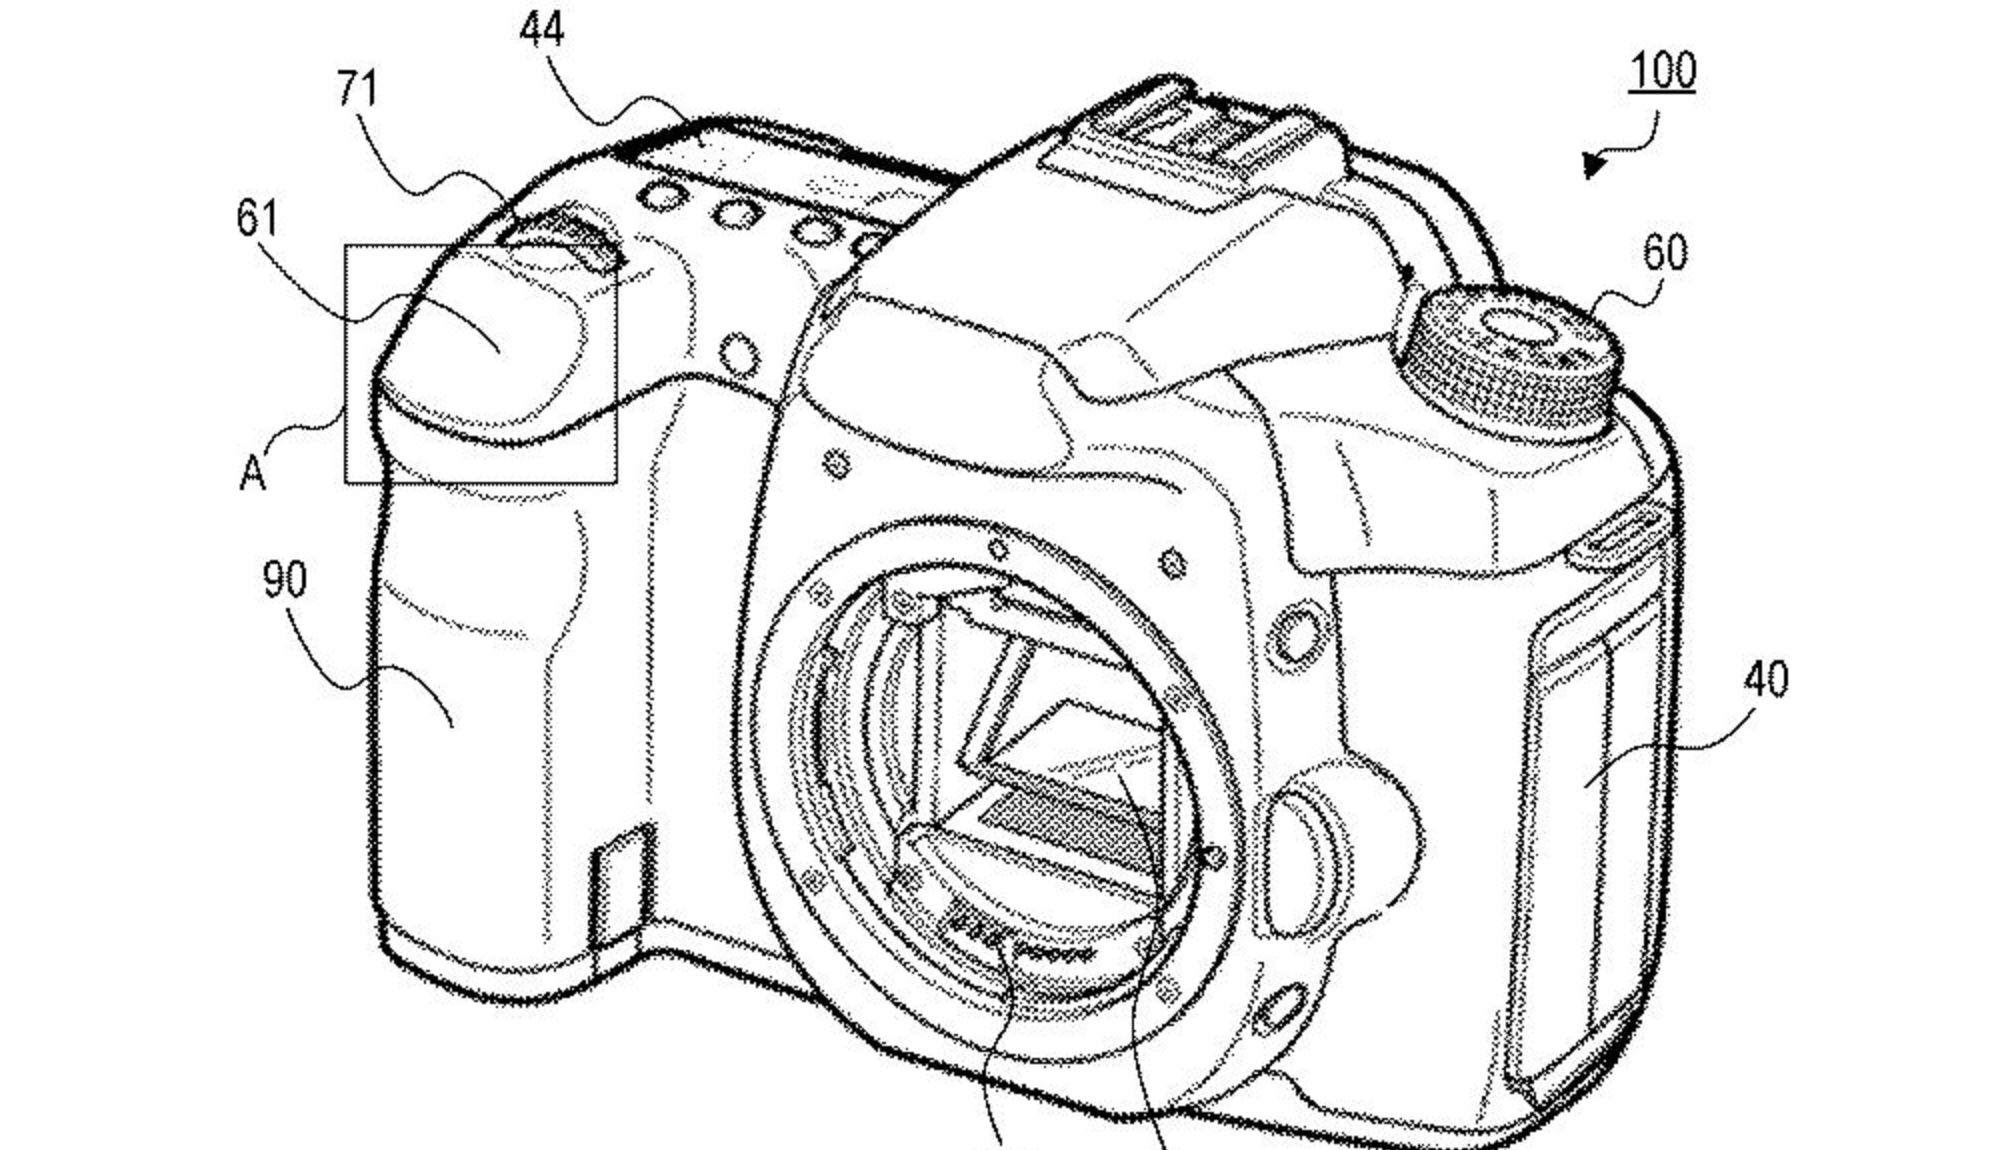 Canon patent for shutter touchpad